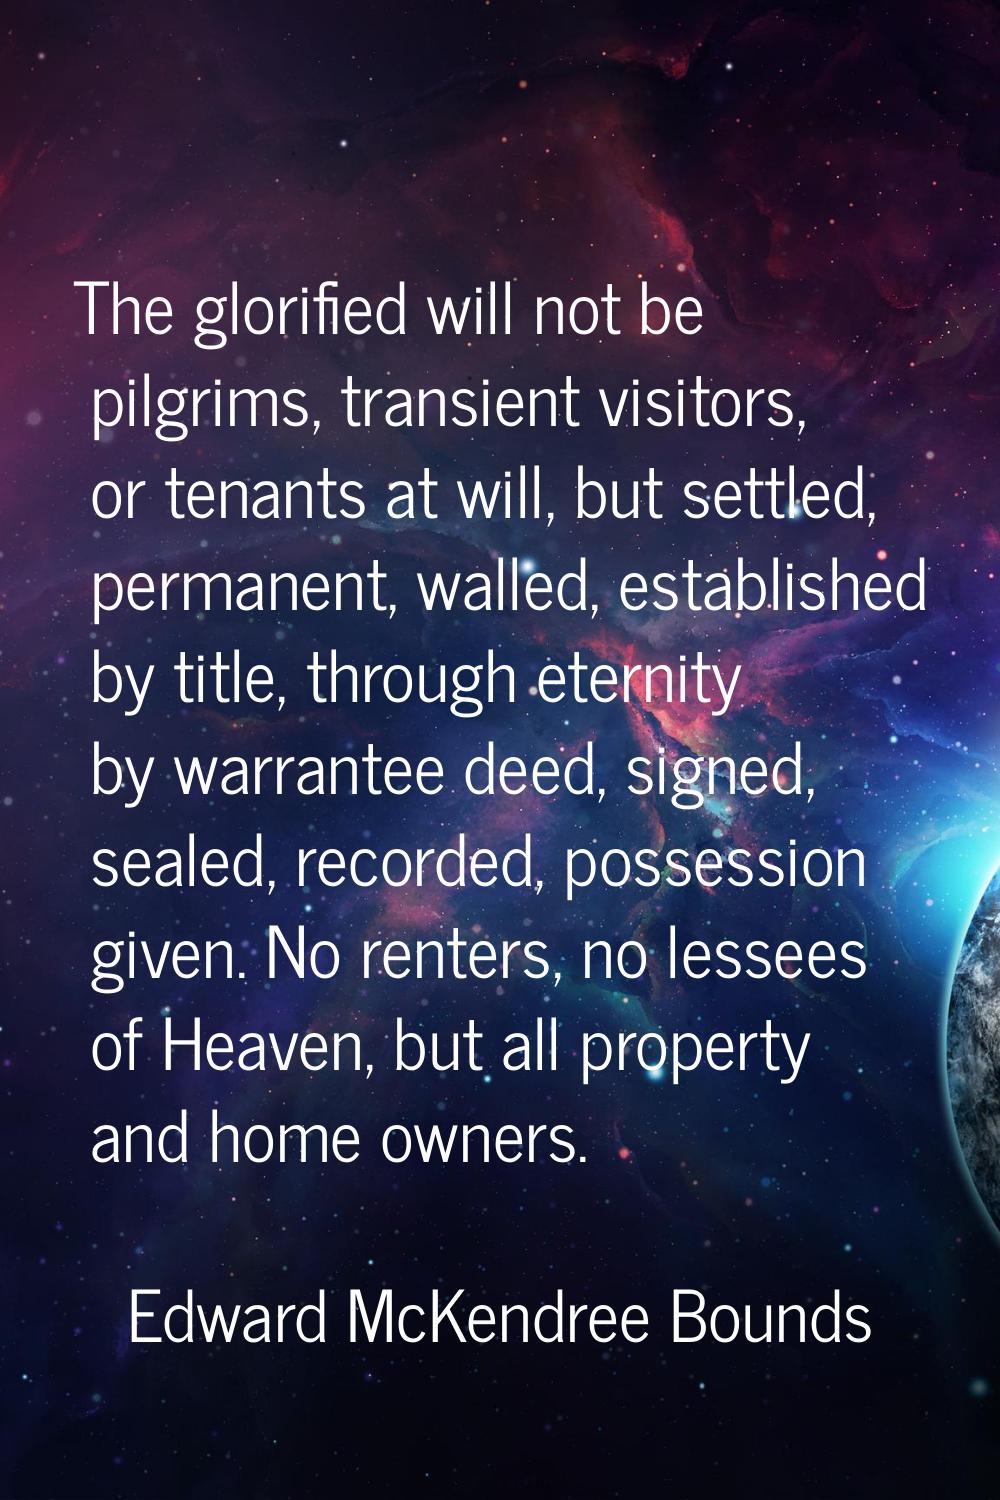 The glorified will not be pilgrims, transient visitors, or tenants at will, but settled, permanent,